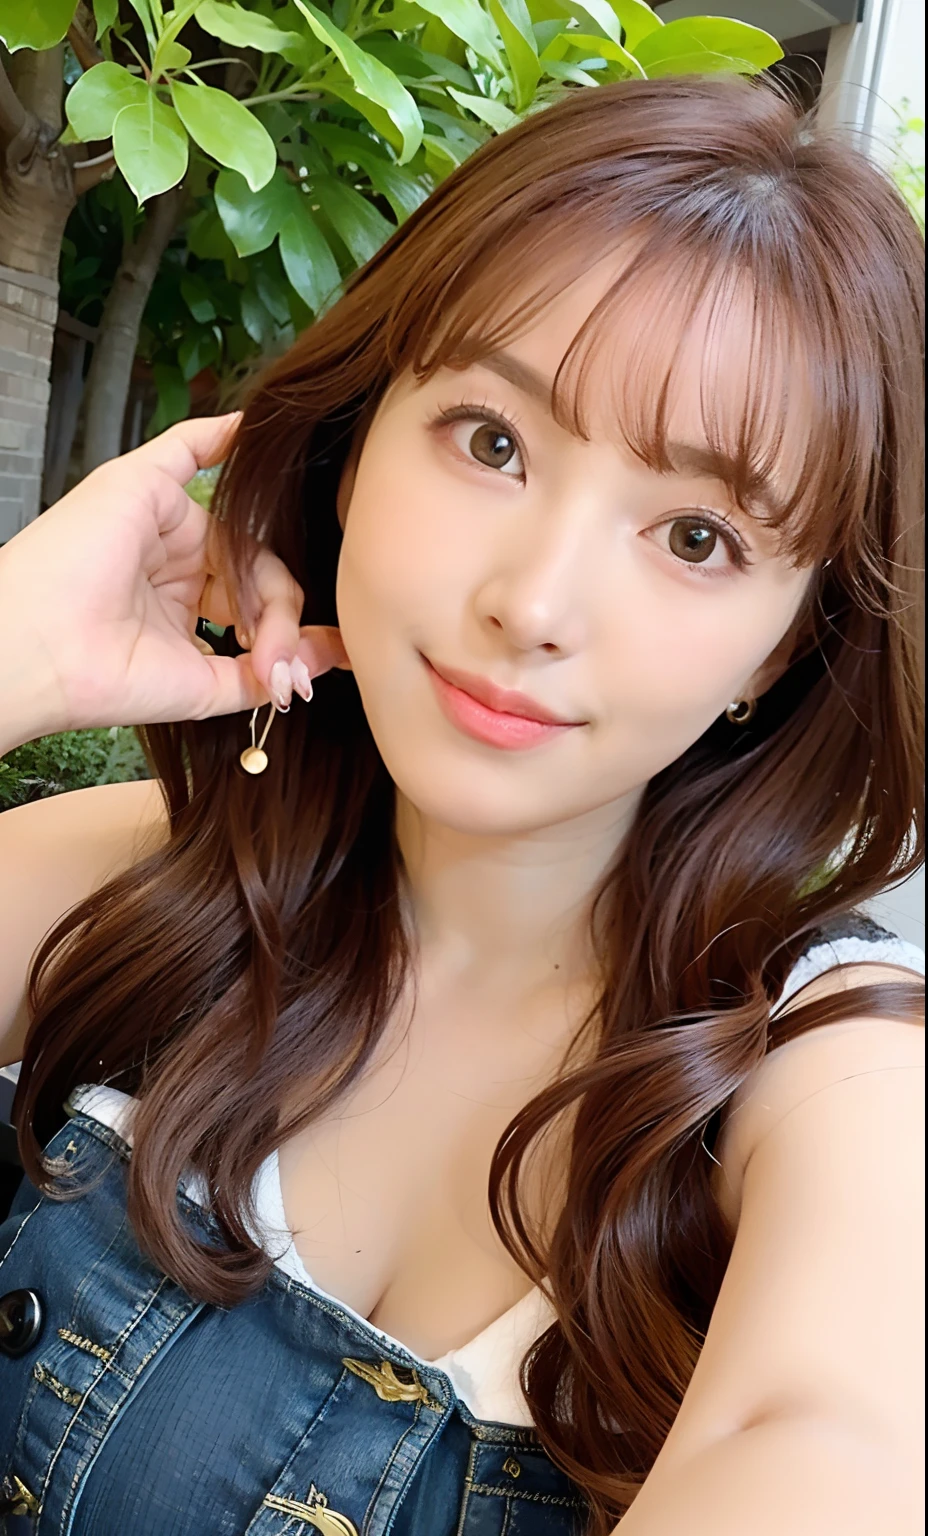 Best quality, long hair bangs curly two side braids loose towards the front, (Brown hair color), Ultra-high resolution, (Photorealistic:1.4), 1lovelygirl, bit girl, (Young), pink puffy , NSFW, ,(Kpop idol), (aegyo sal:1),  Smiling, Cute, full bodyesbian, hands together in front, Background street, Nature, peaceful neighborhood, Sunlight,Lolita prostitute